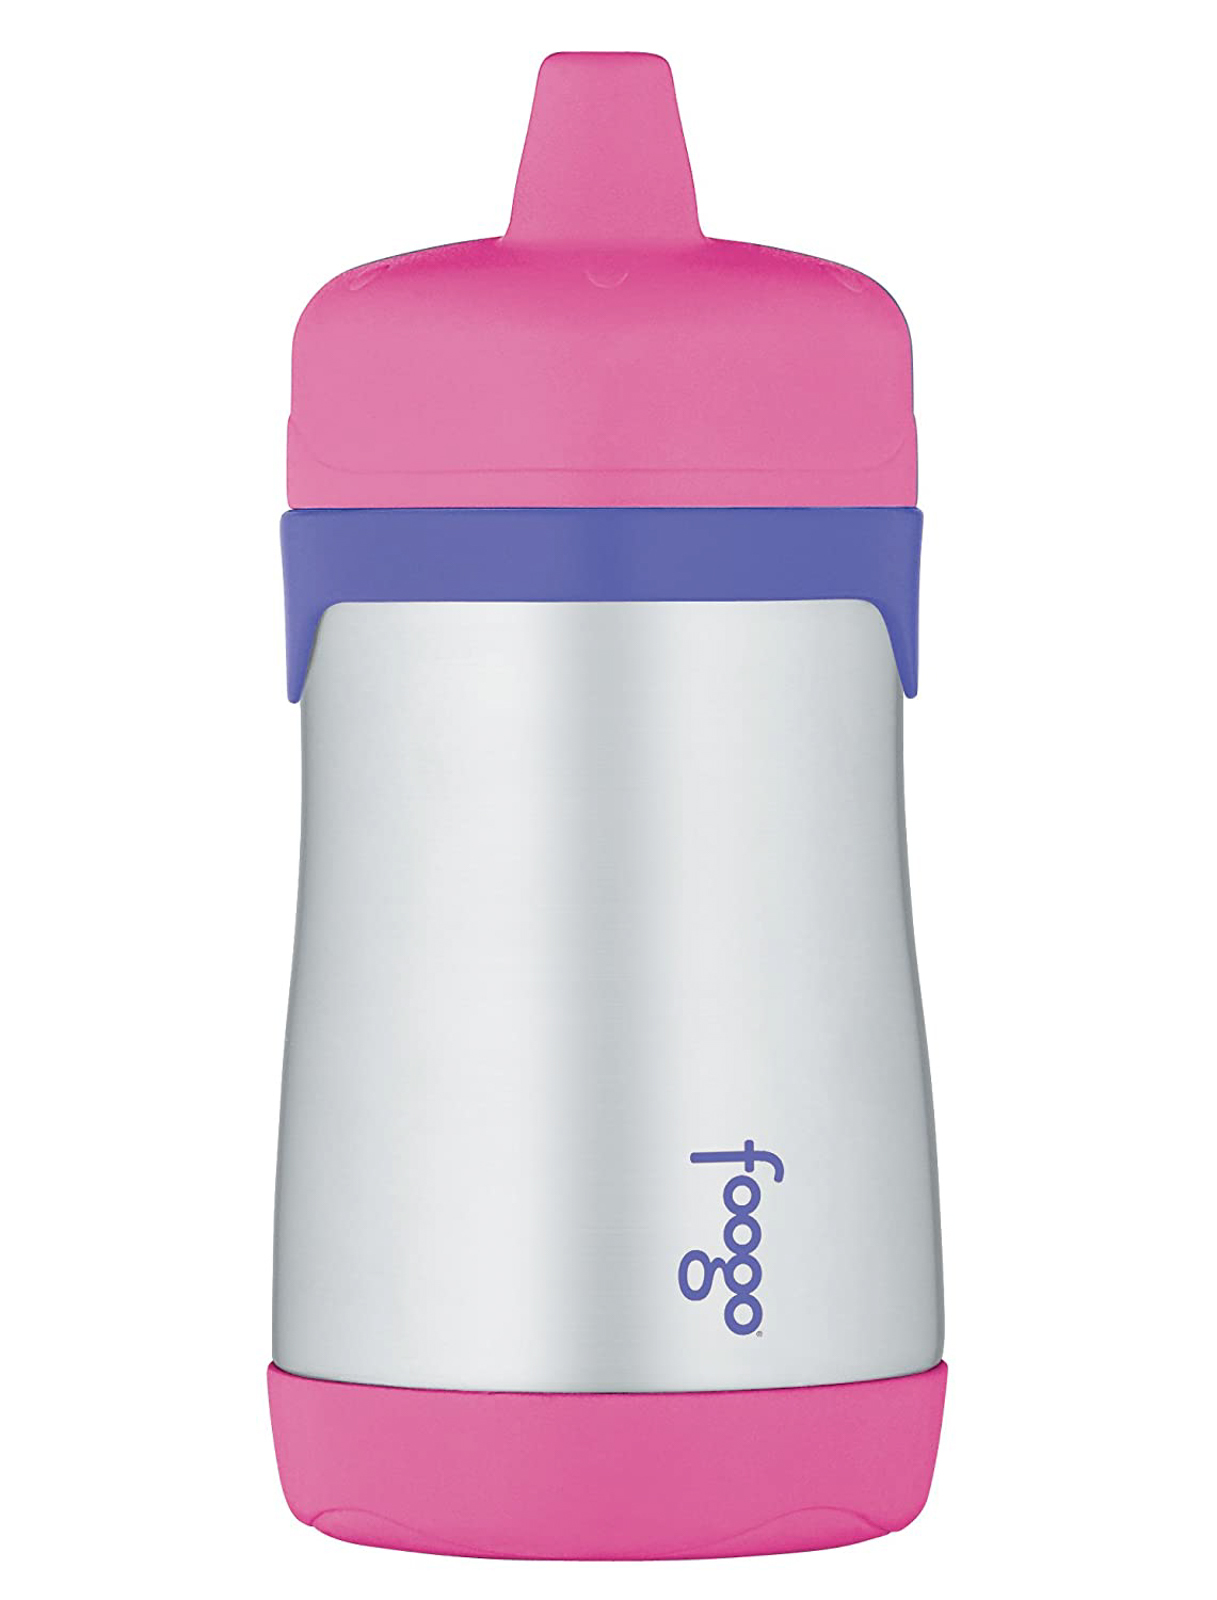 Best sippy cups - Thermos Foogo Sippy Cup